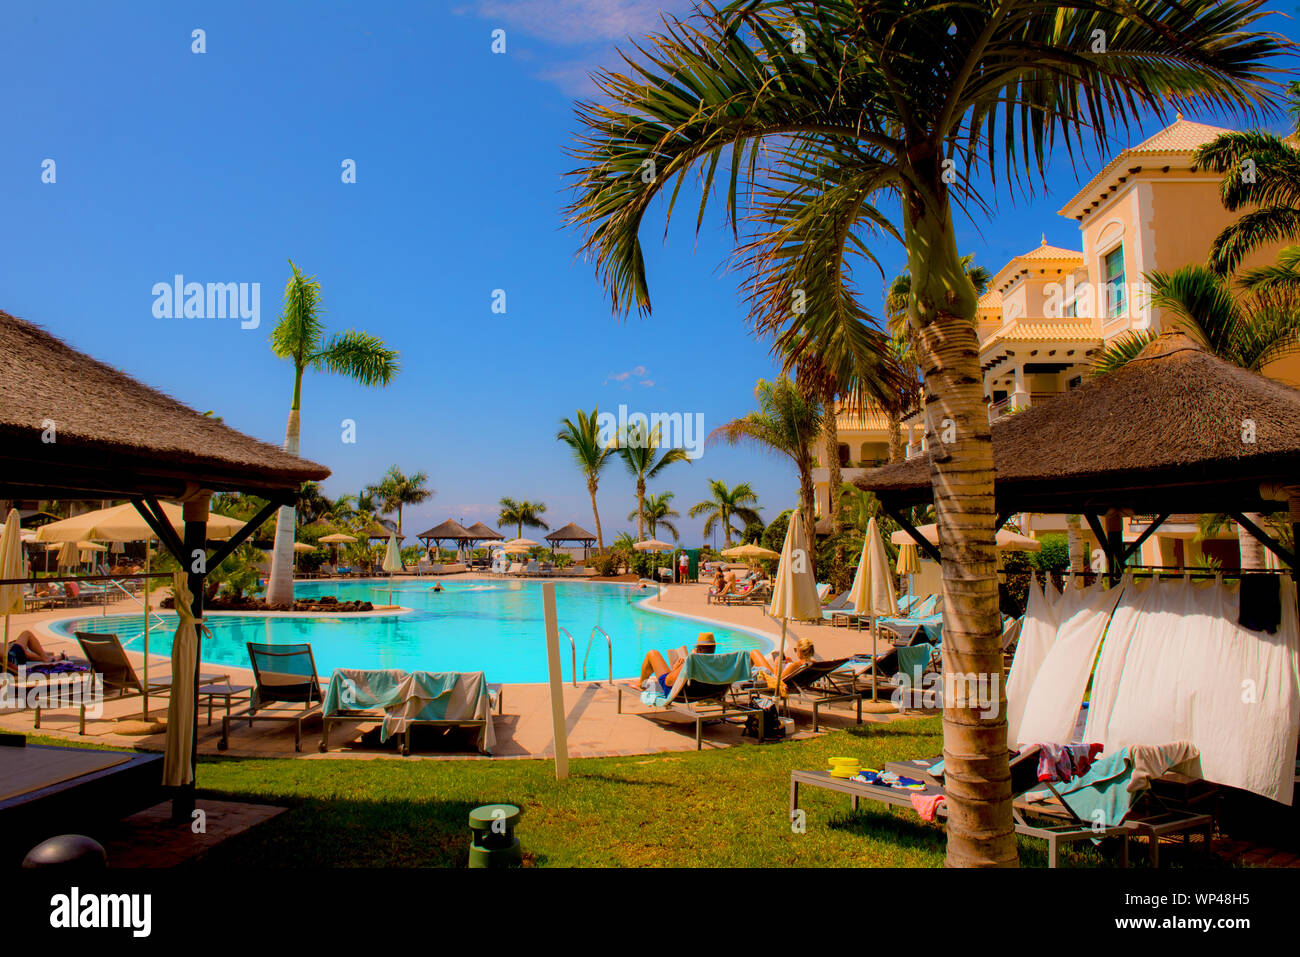 Tenerife, Canary Islands, Spain 6 October 2018: Luxury hotel on the coast with palm trees, swimming Poland unidentified tourists sunbathing. Stock Photo